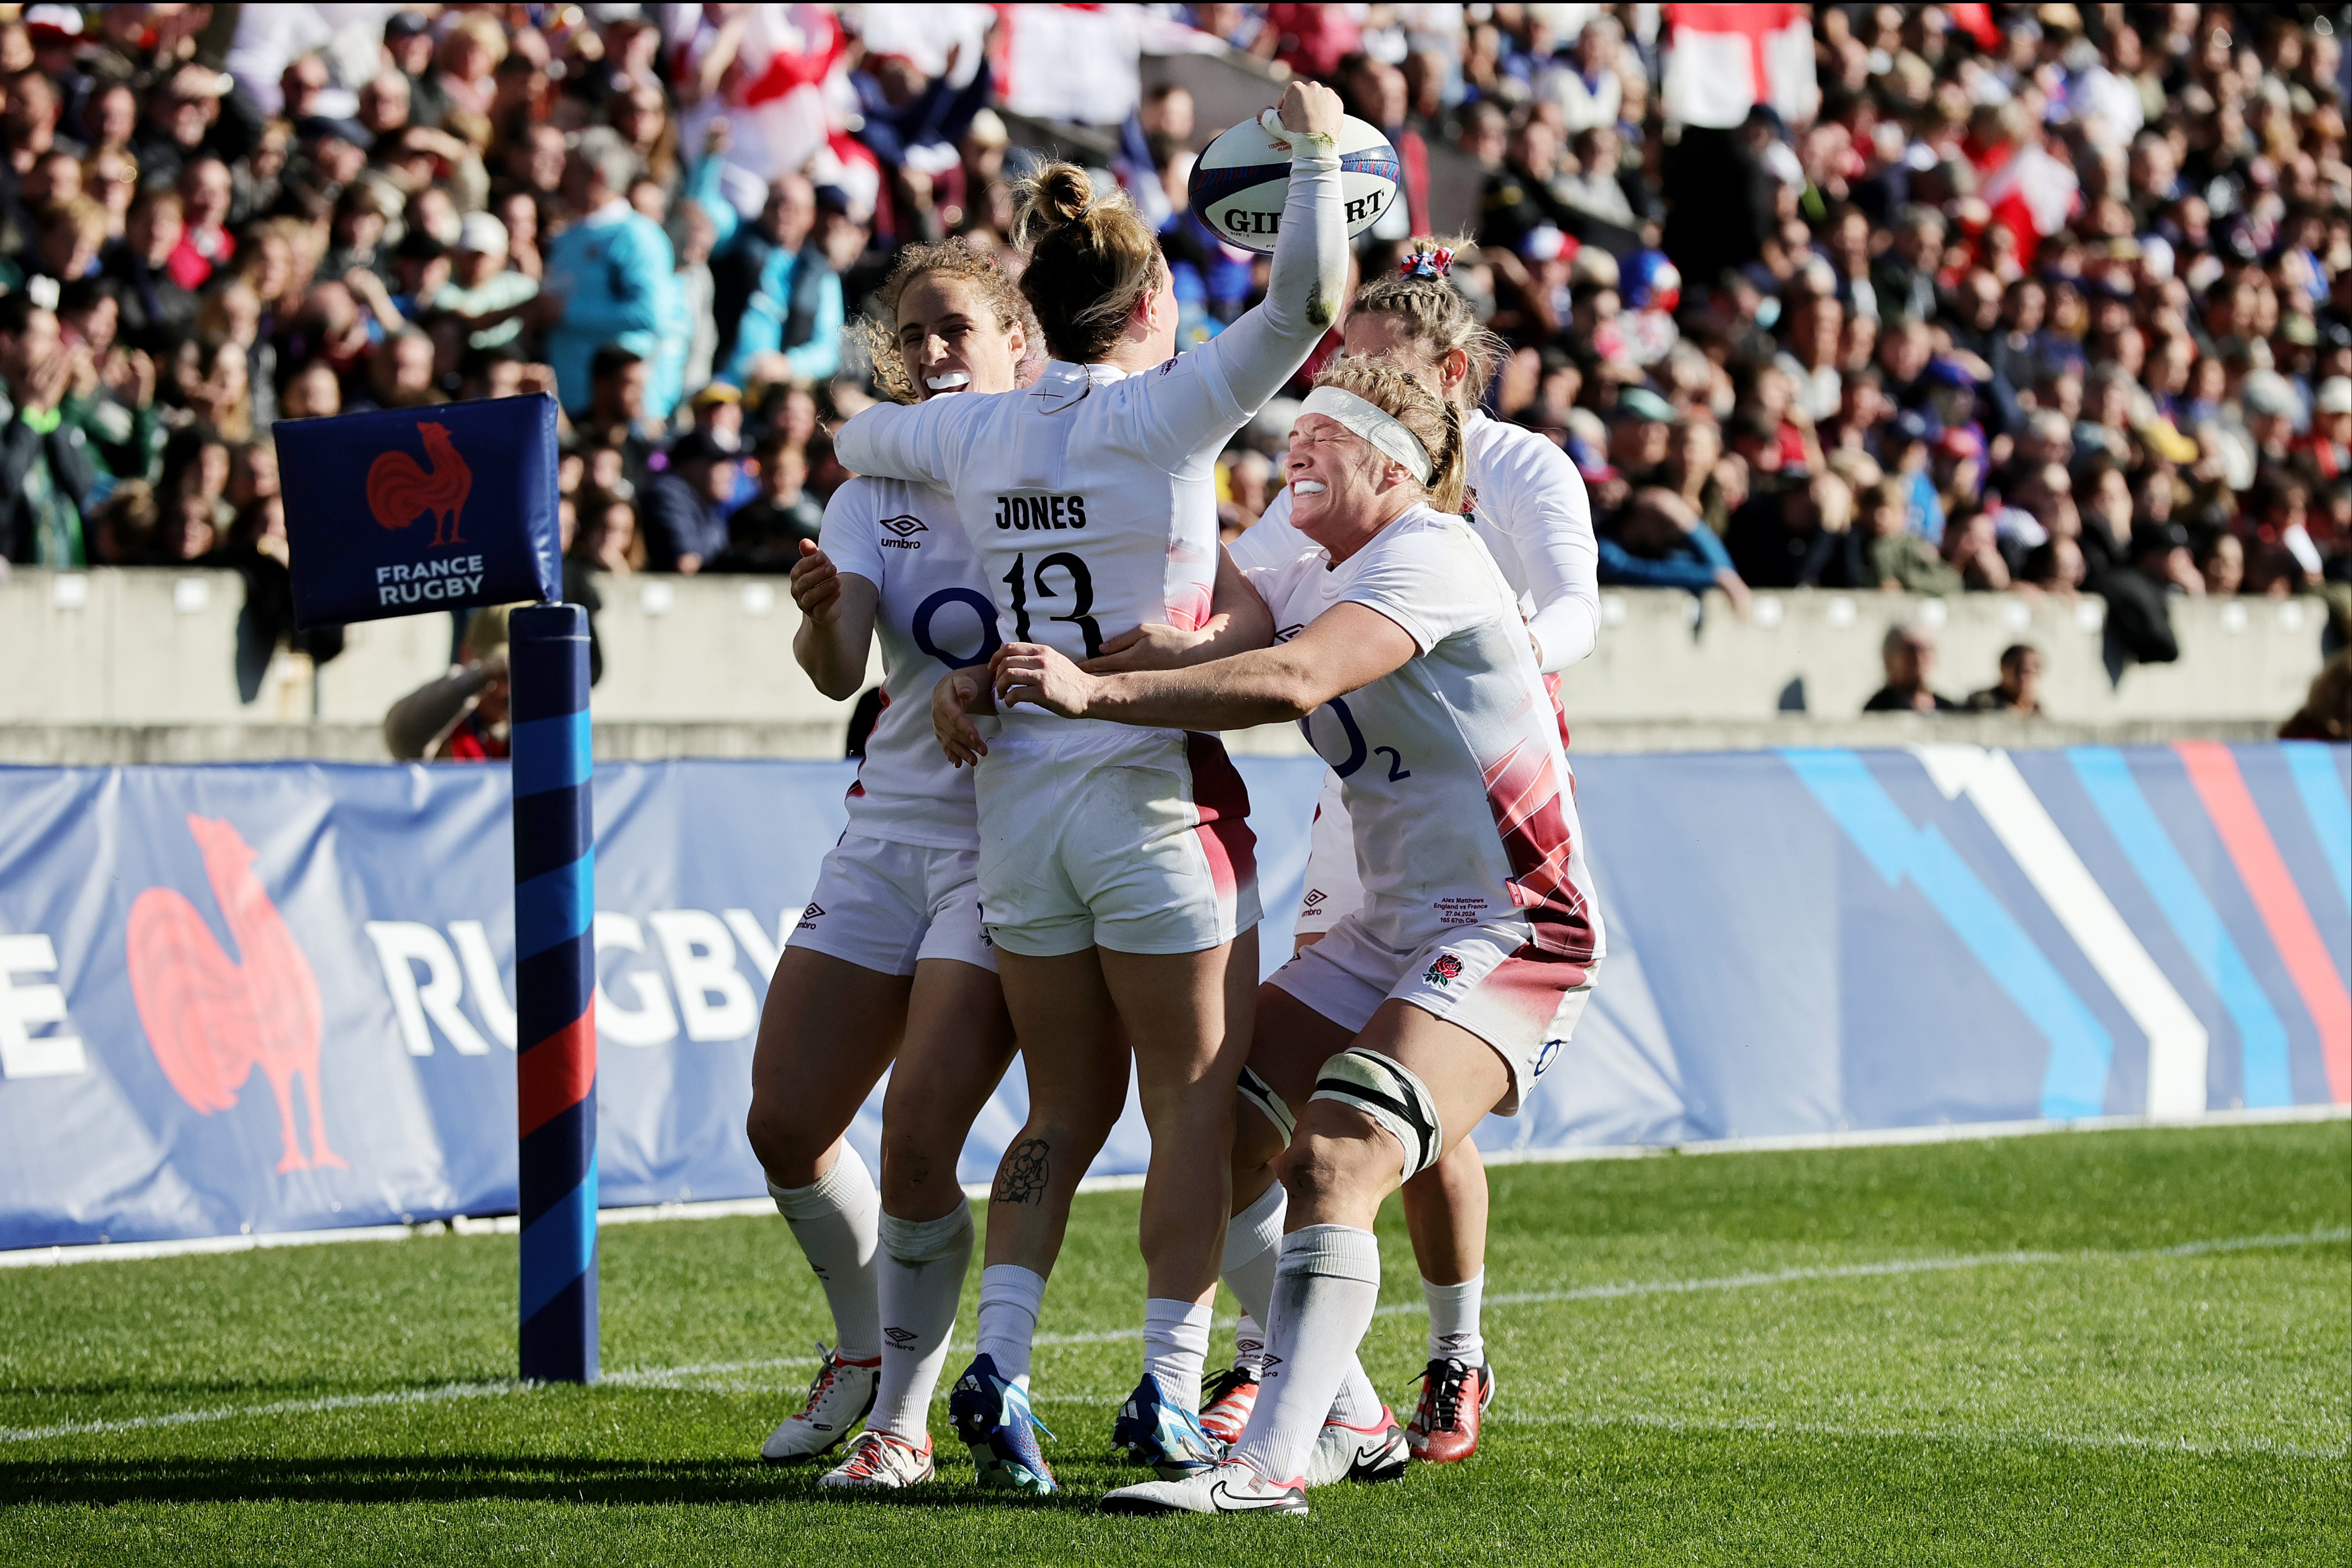 England embraced a more attacking style in the Women’s Six Nations